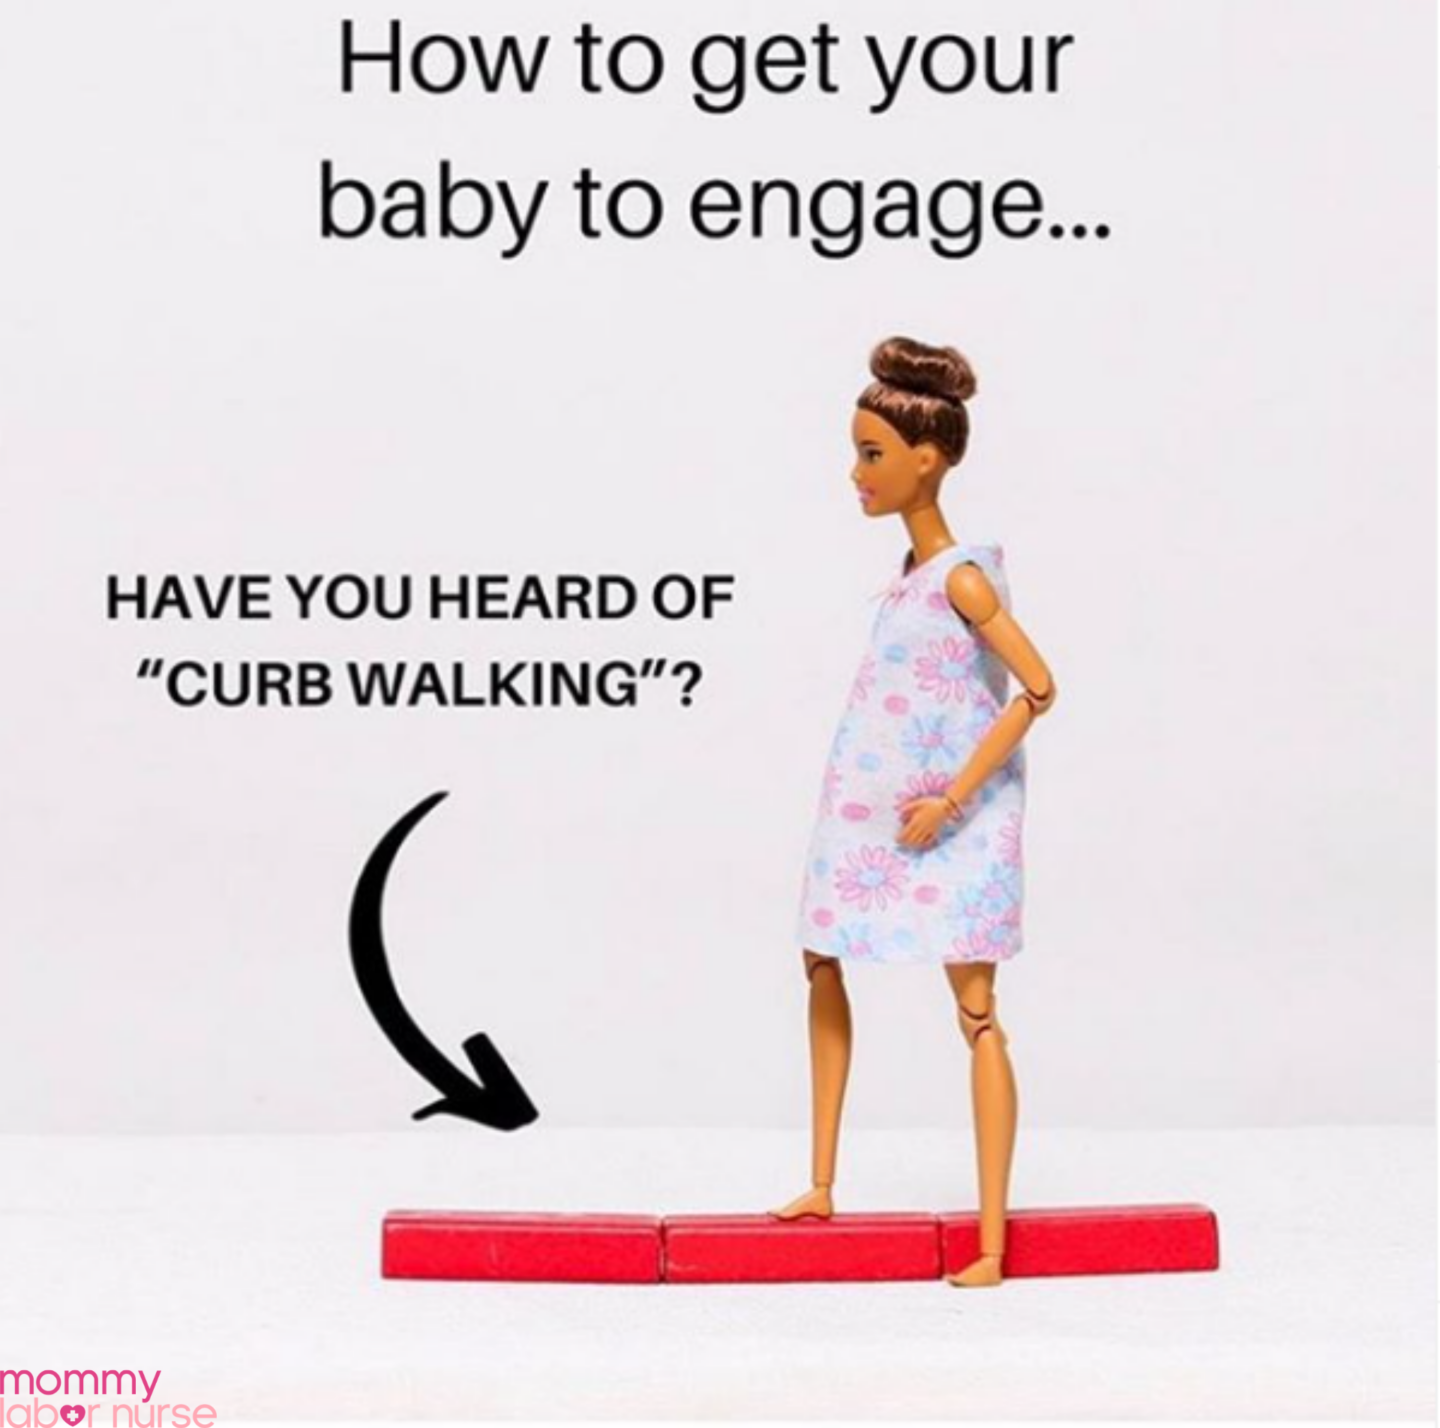 curb walking infographic, natural ways to induce labor infographic, curb walking to induce labor